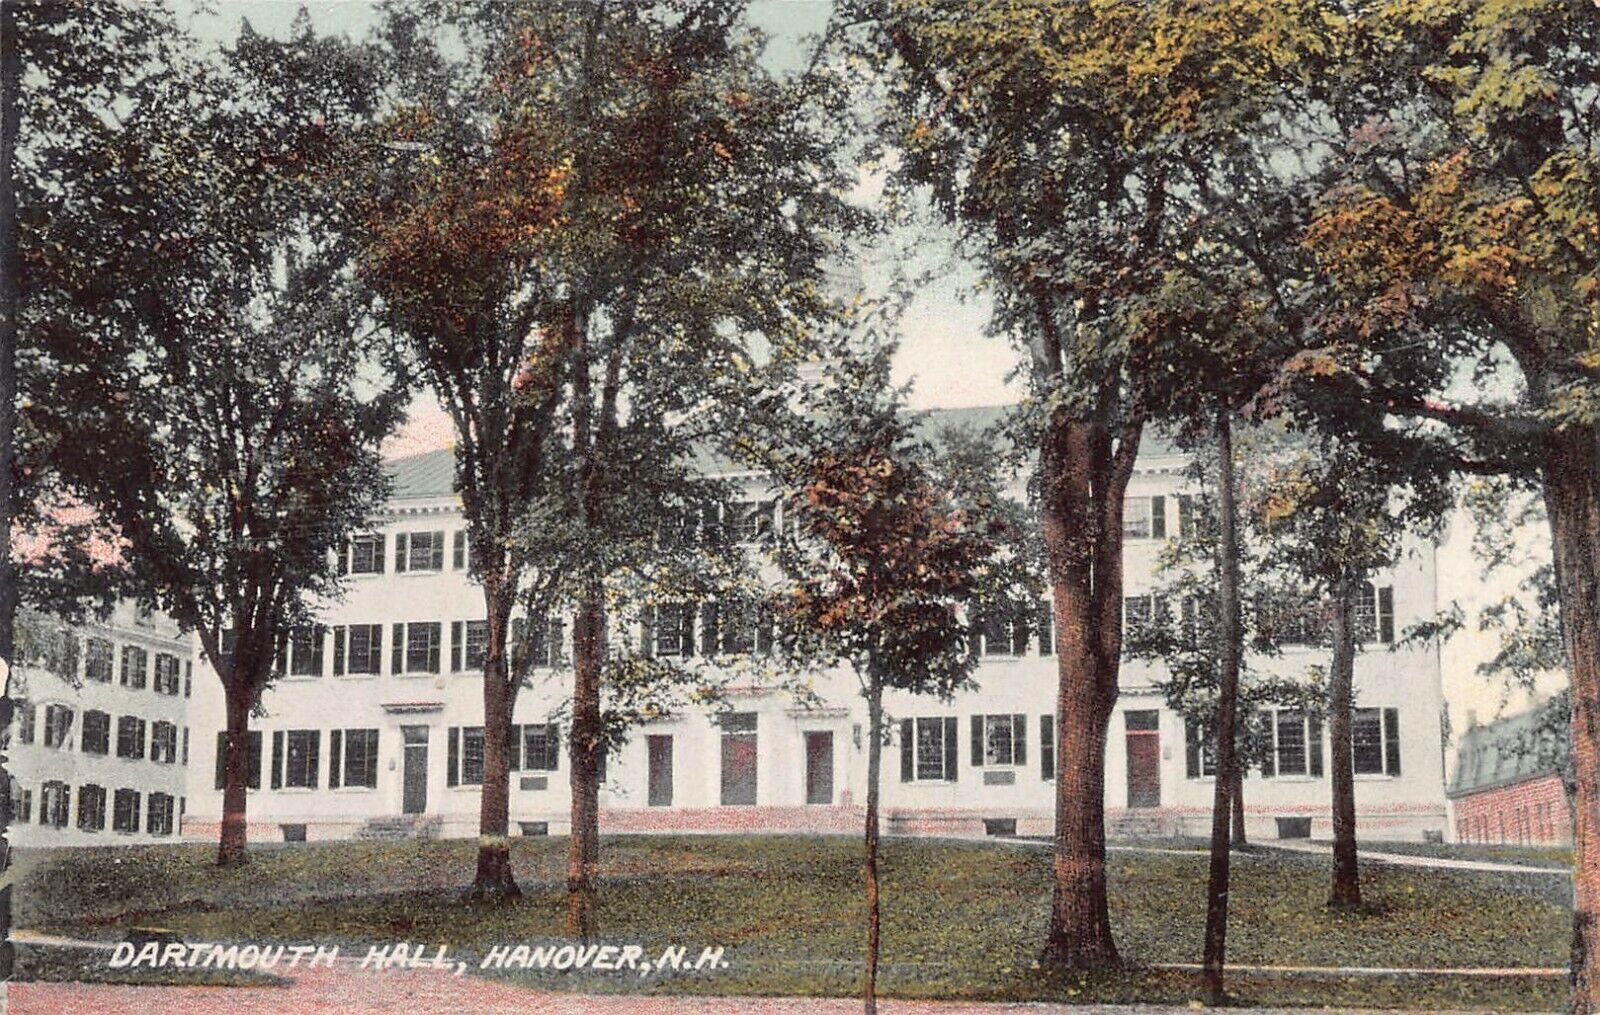  Dartmouth Hall, Hanover, New Hampshire, Early Postcard, Used in 1908